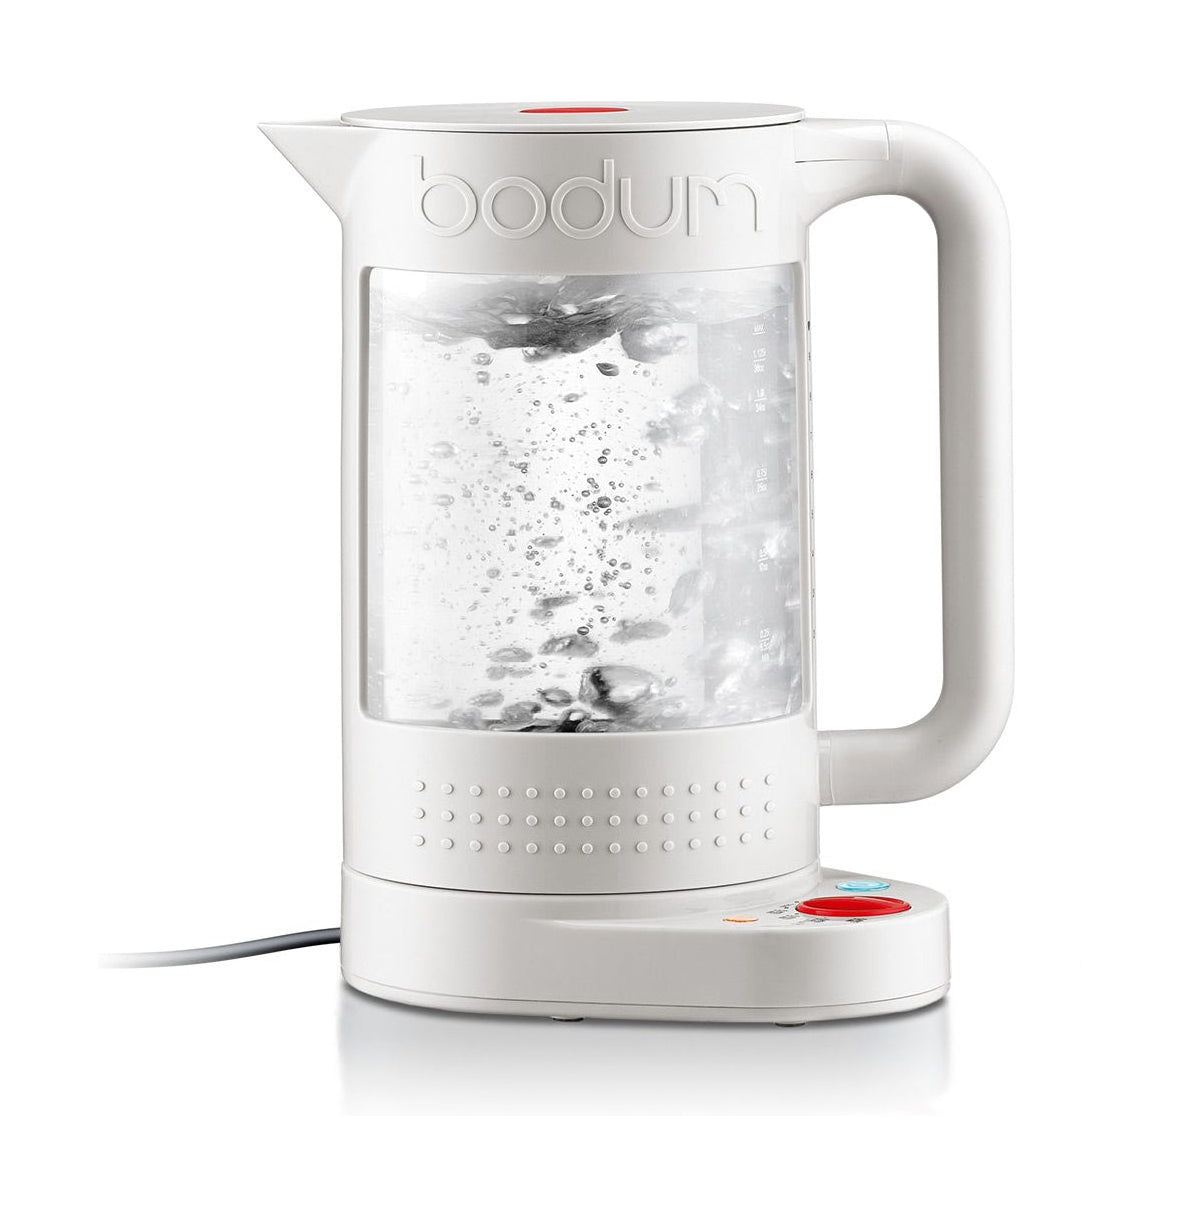 Bodum Bistro Electric Kettle Double Walled With Temperature Control Cream Colored, 1.1 L